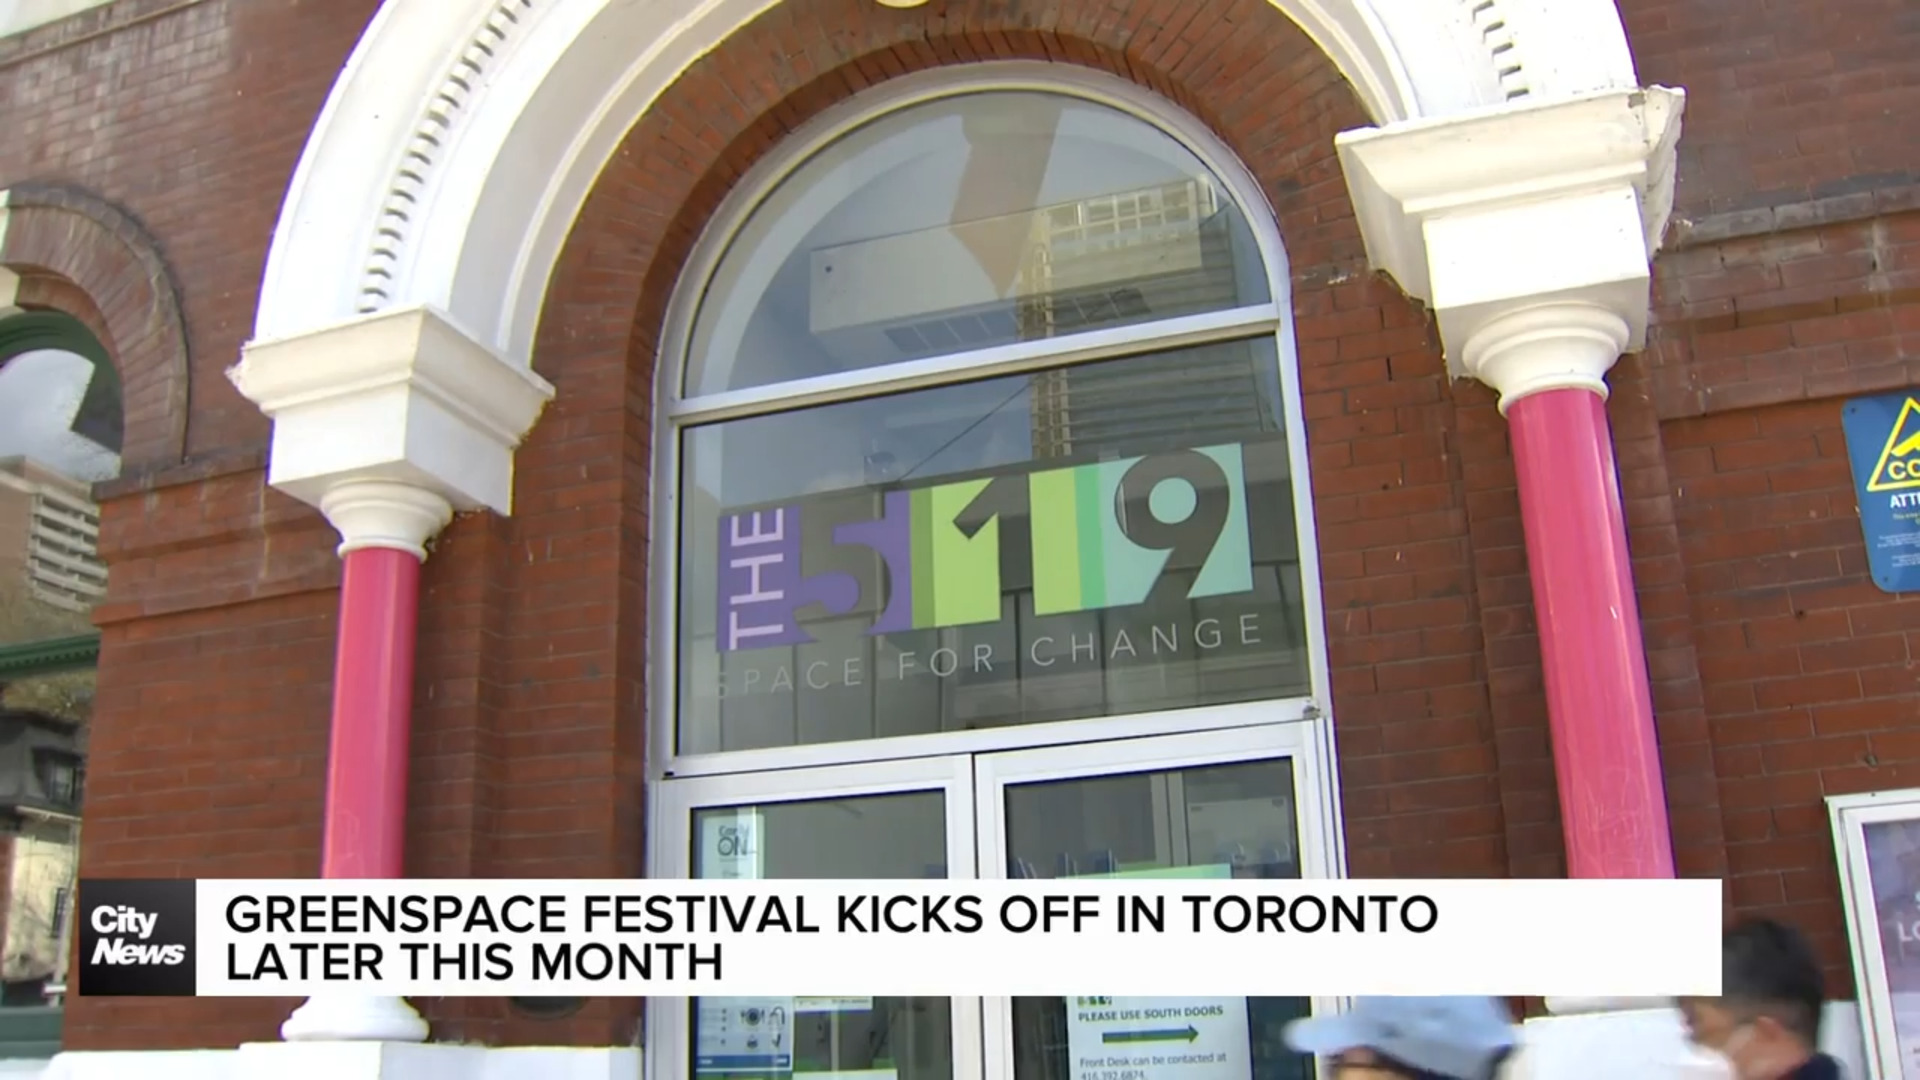 Greenspace festival kicks off in Toronto later this month